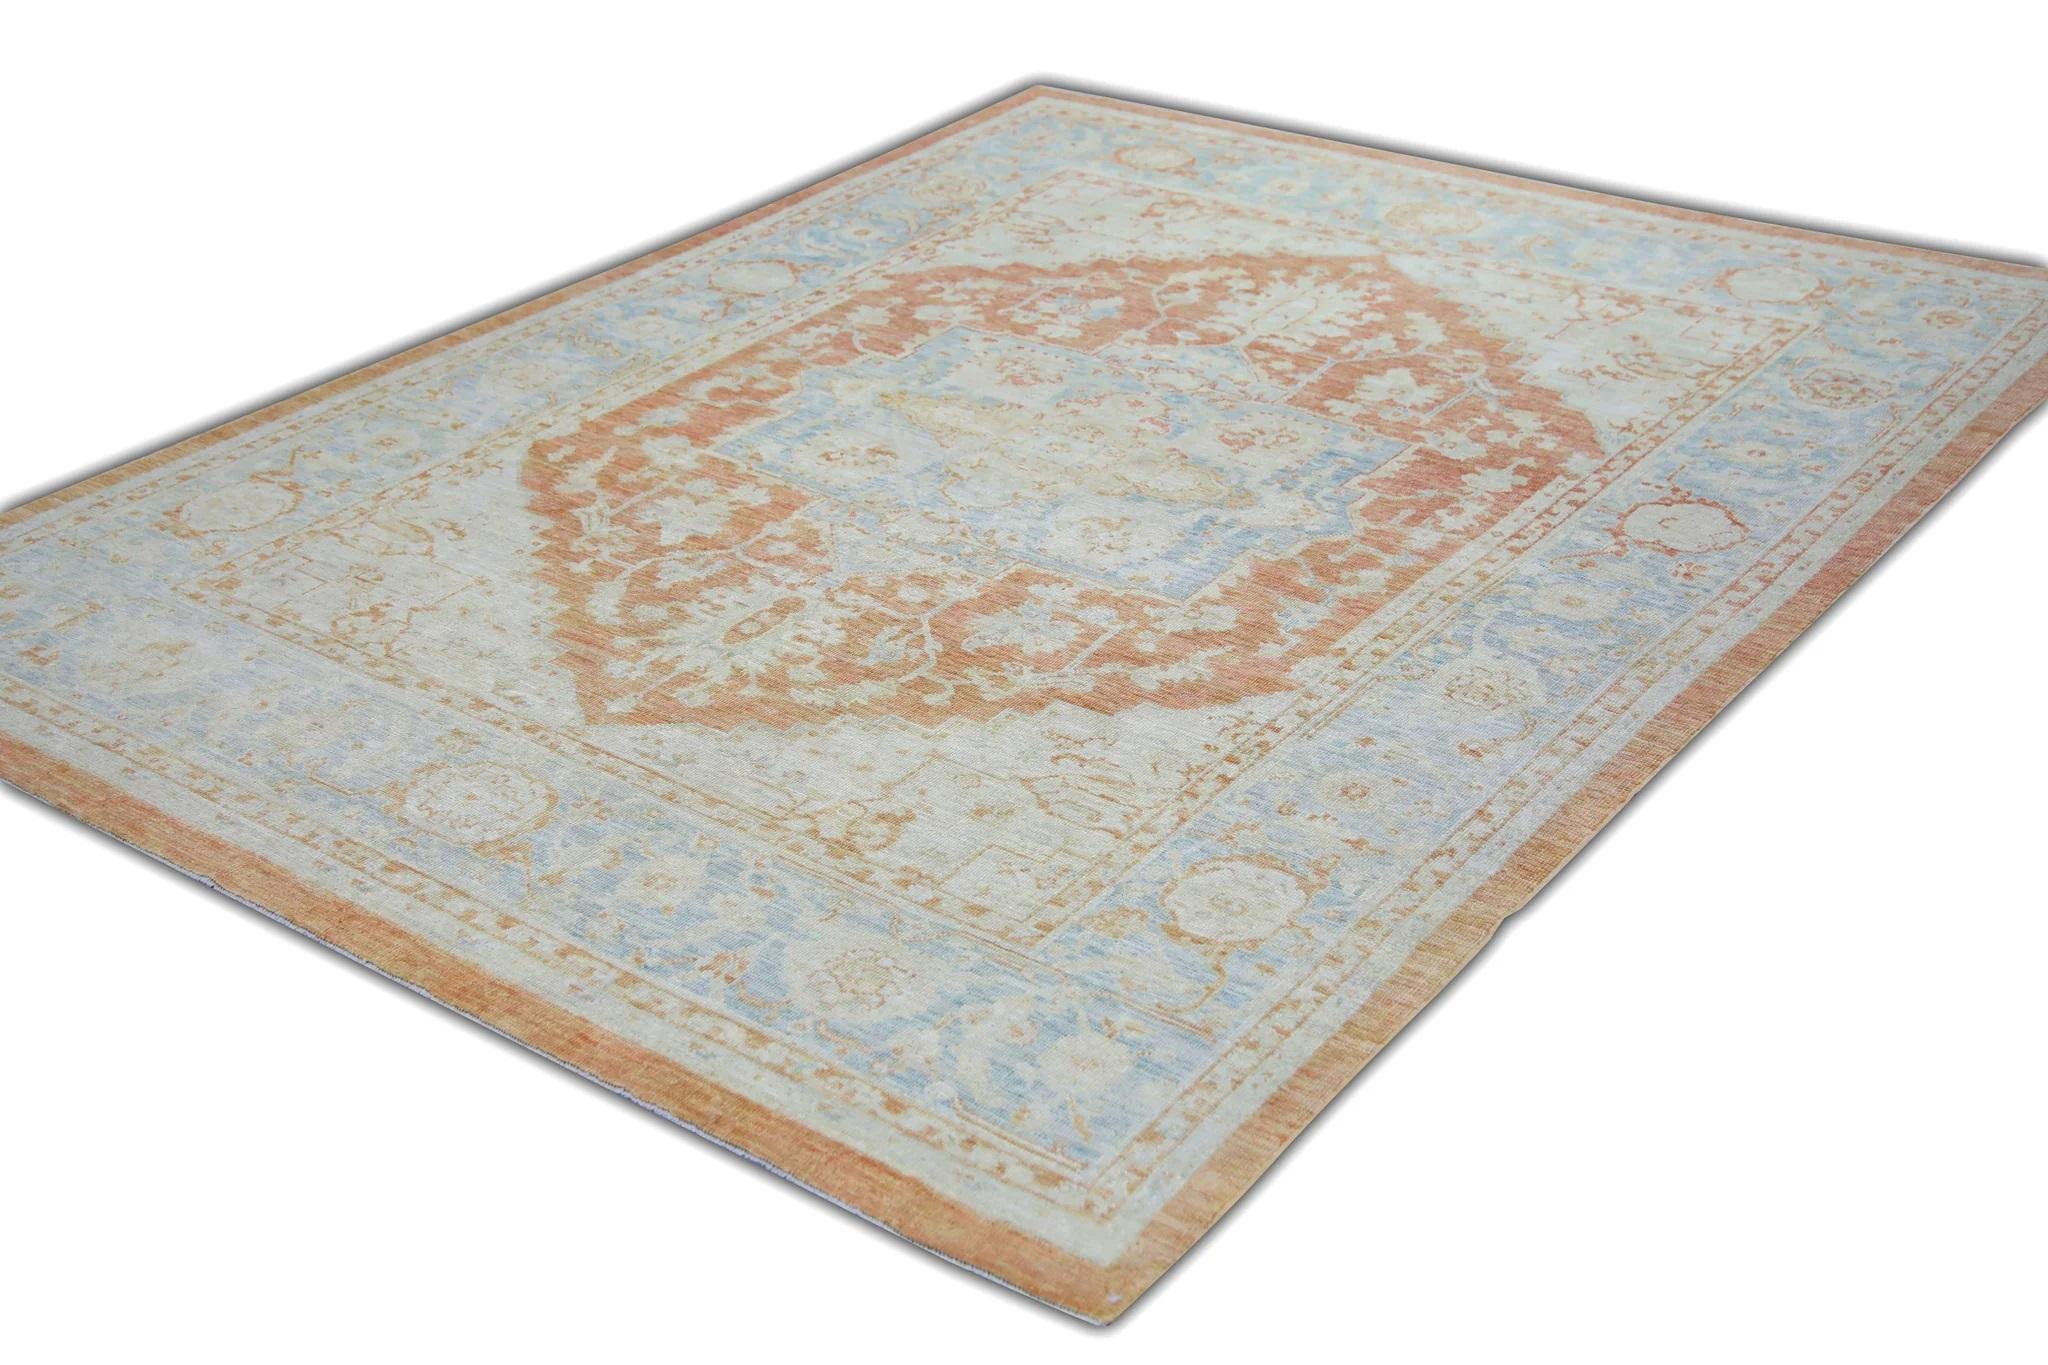 Contemporary Floral Turkish Finewoven Wool Oushak Rug in Salmon Pink and Baby Blue 6'2